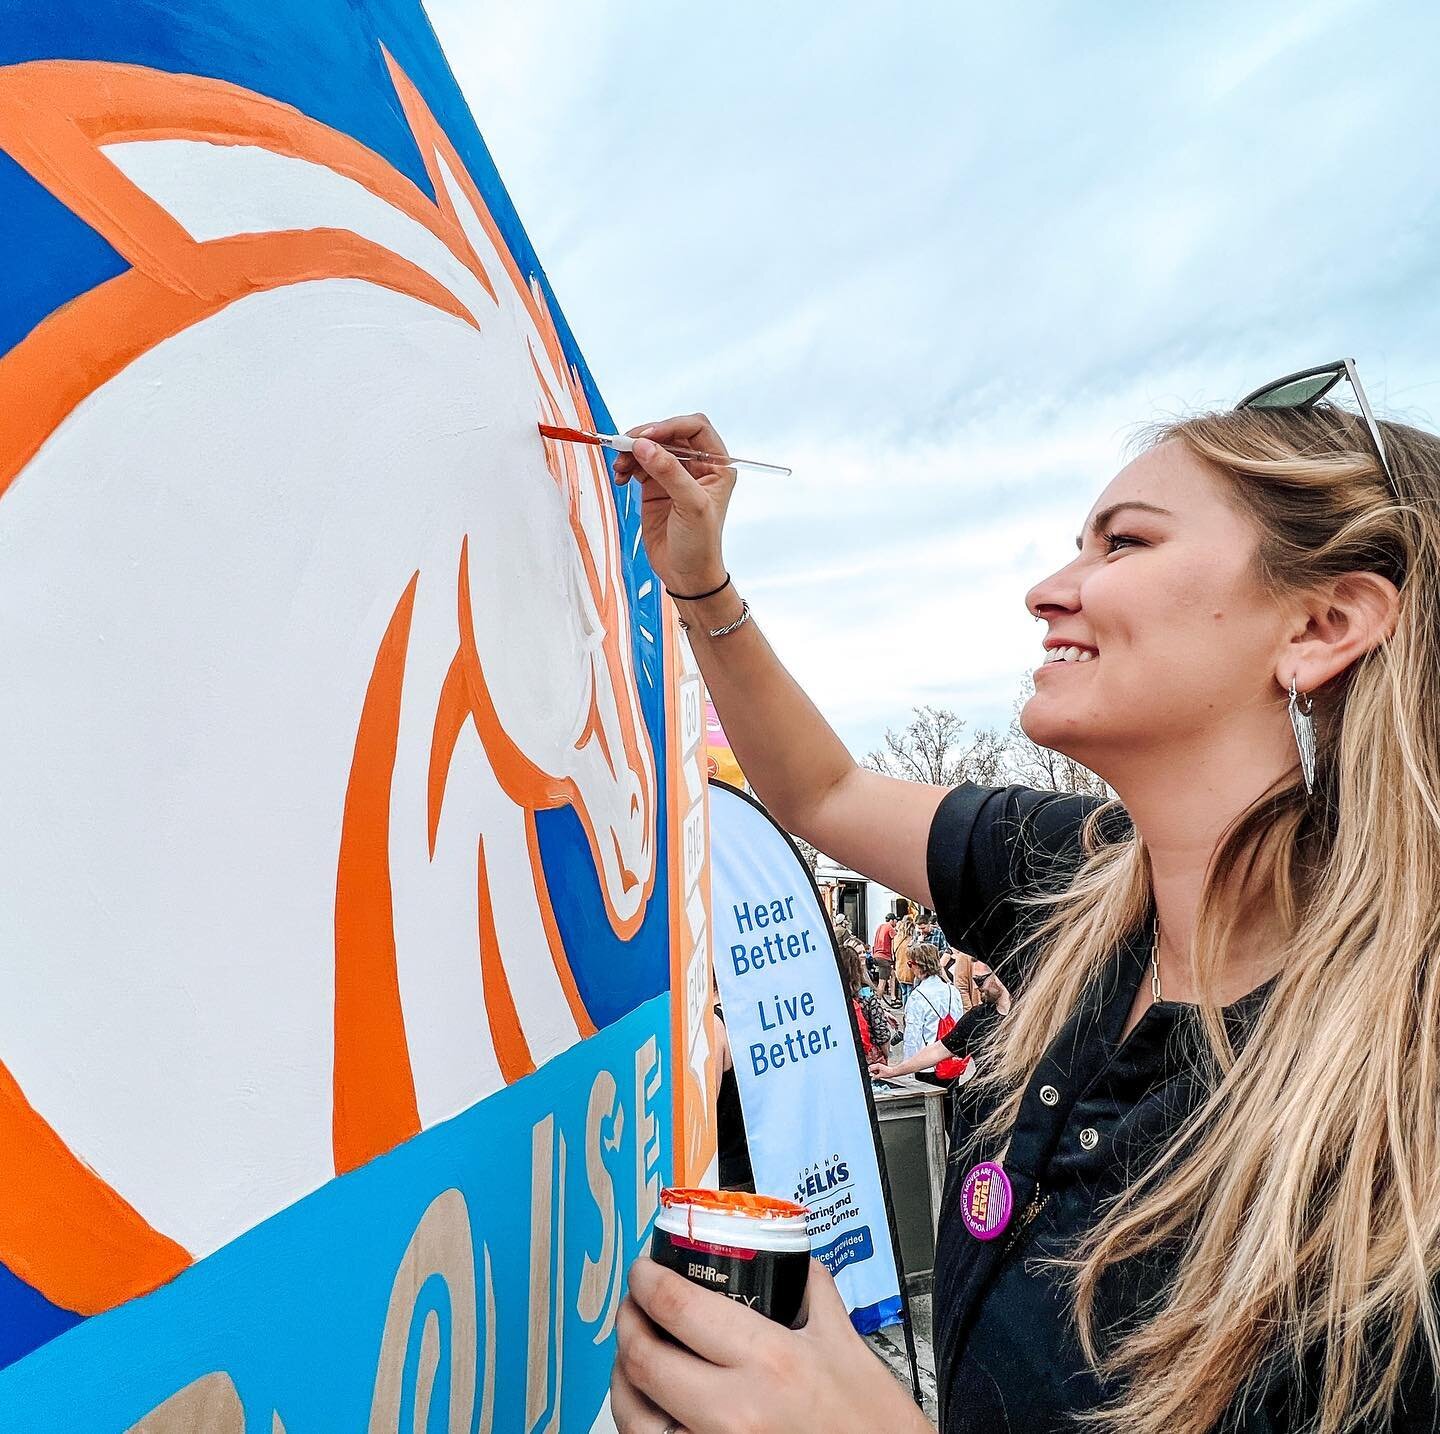 I was commissioned to paint a mural for @boisestateuniversity / @boisestatealumni at @treefortfest 🤩 ✨

I had such an incredible time live painting and seeing so many old friends!! This was my first year attending Treefort and I am 100% sold. The vi